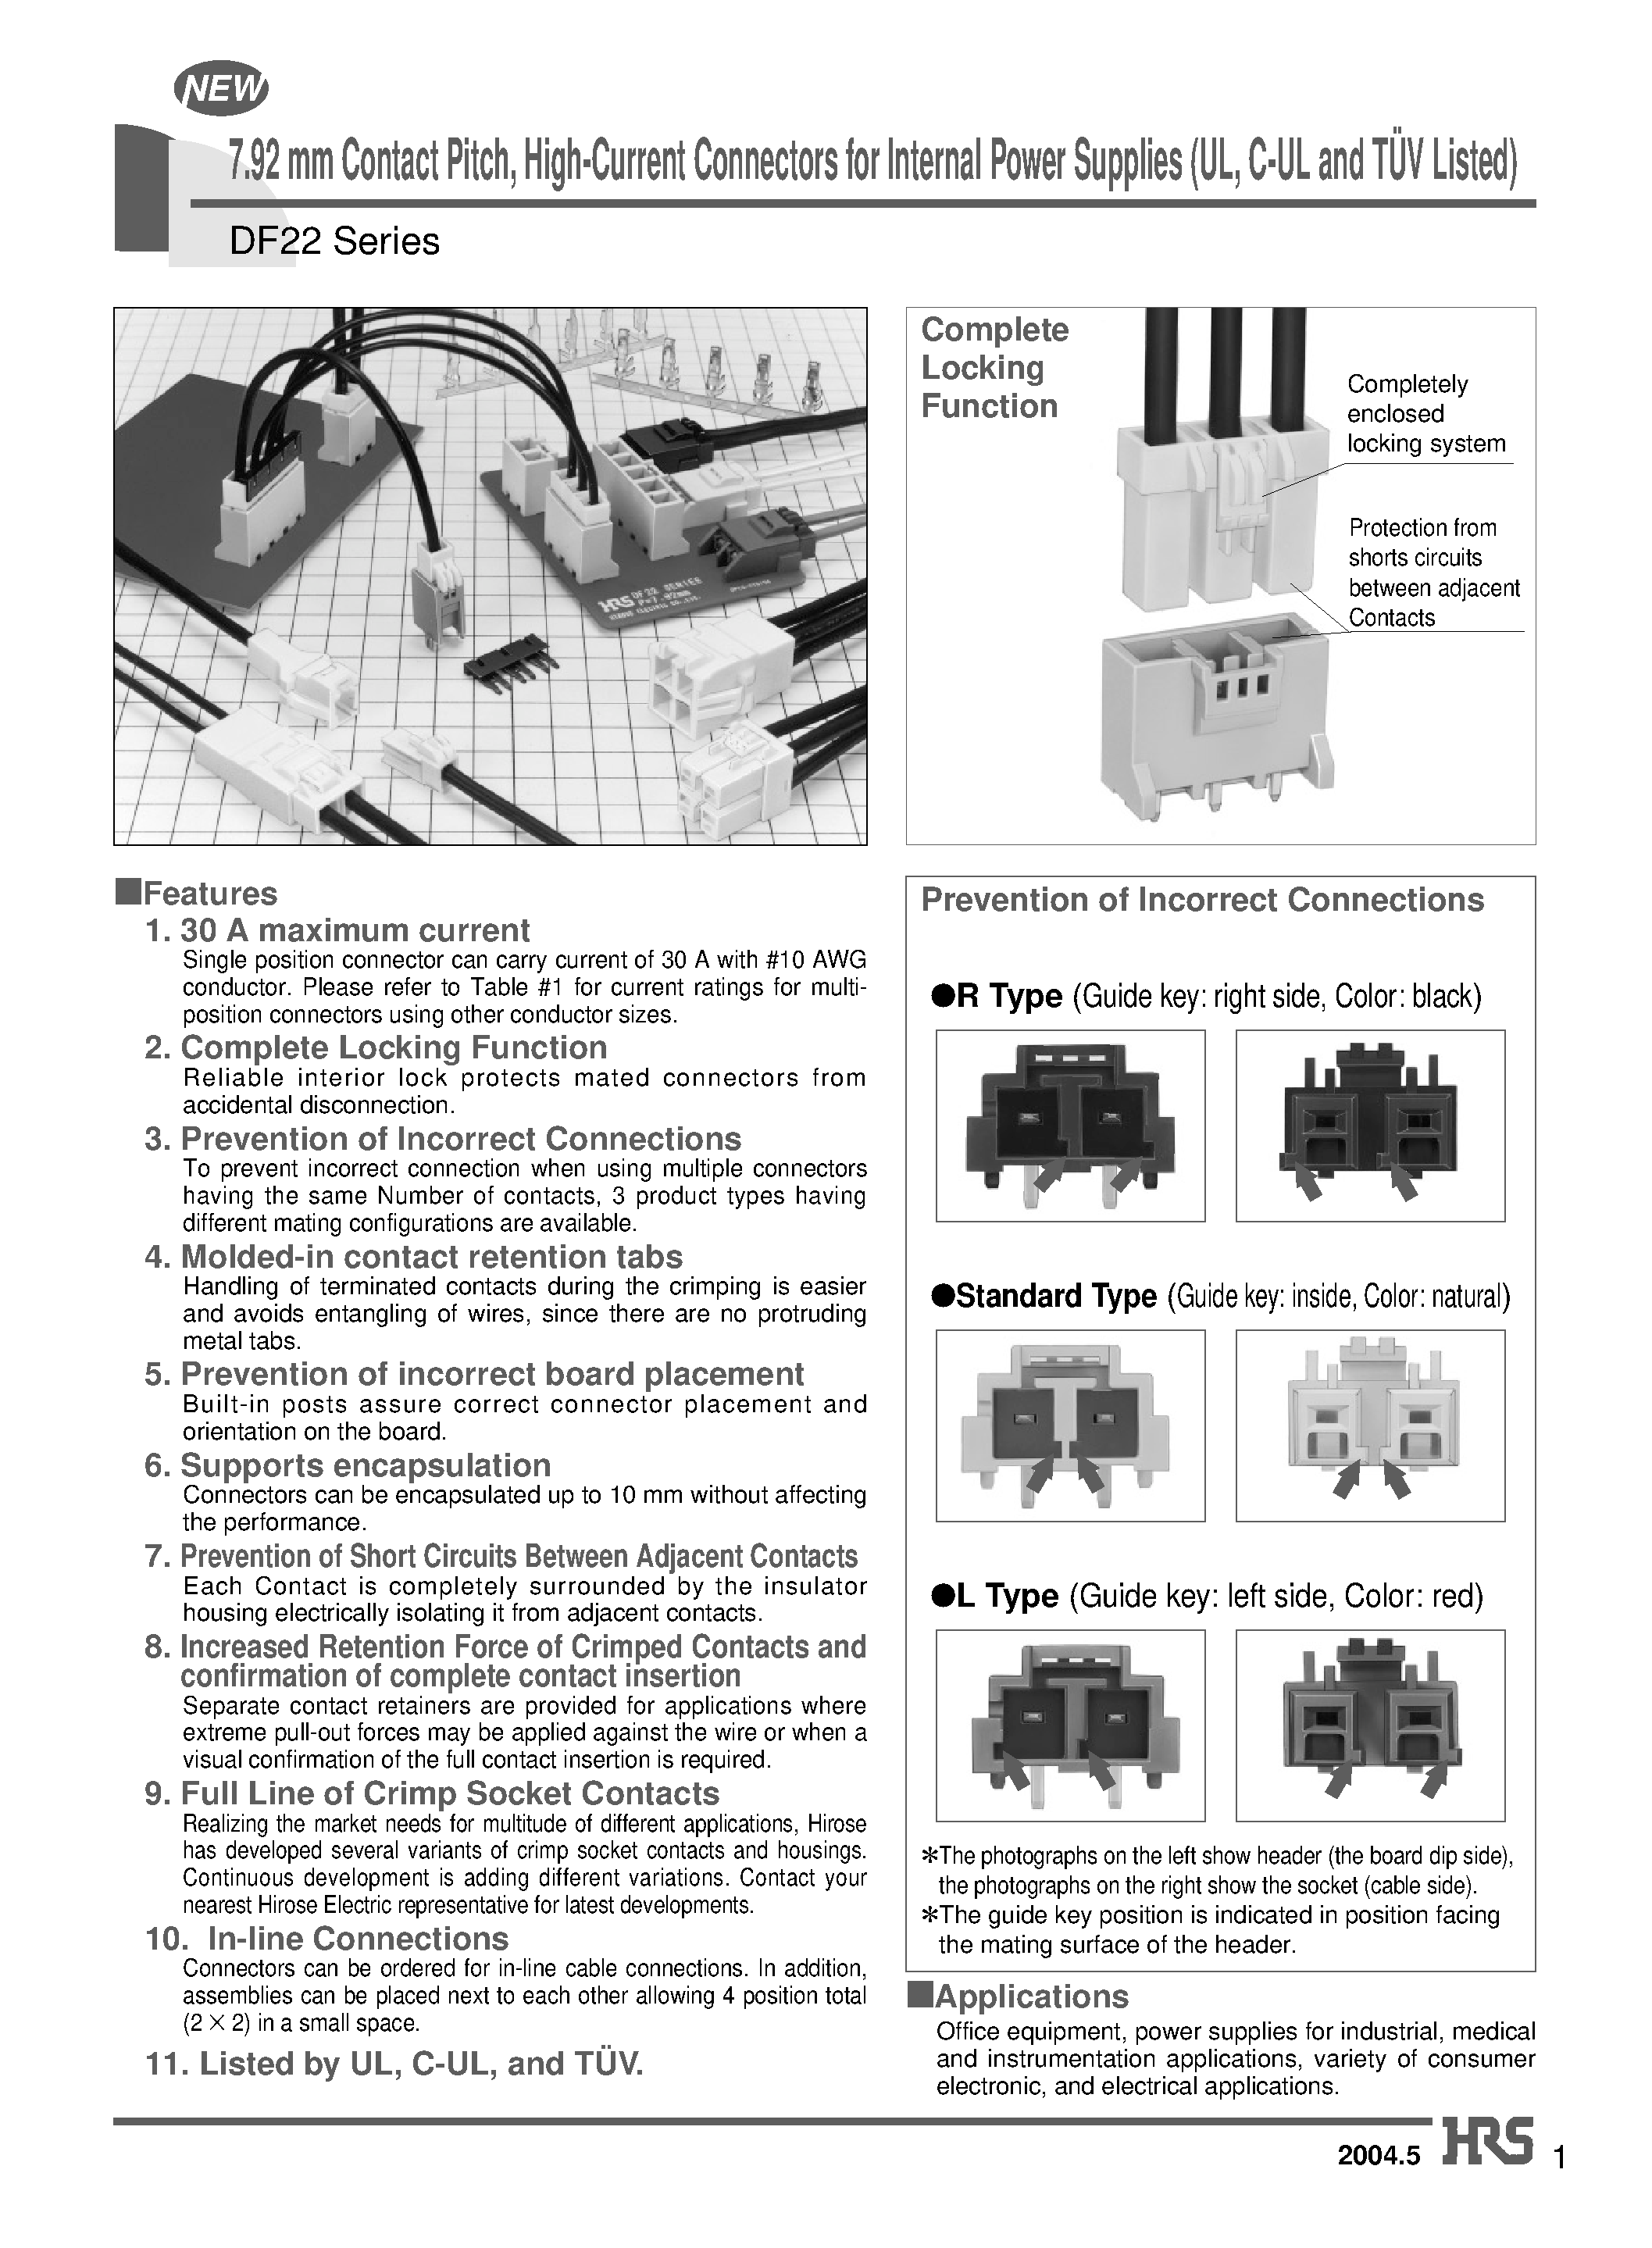 Даташит DF22A-1S-7.92DSA - 7.92 mm Contact Pitch/ High-Current Connectors for Internal Power Supplies (UL/ C-UL and TUV Listed) страница 1